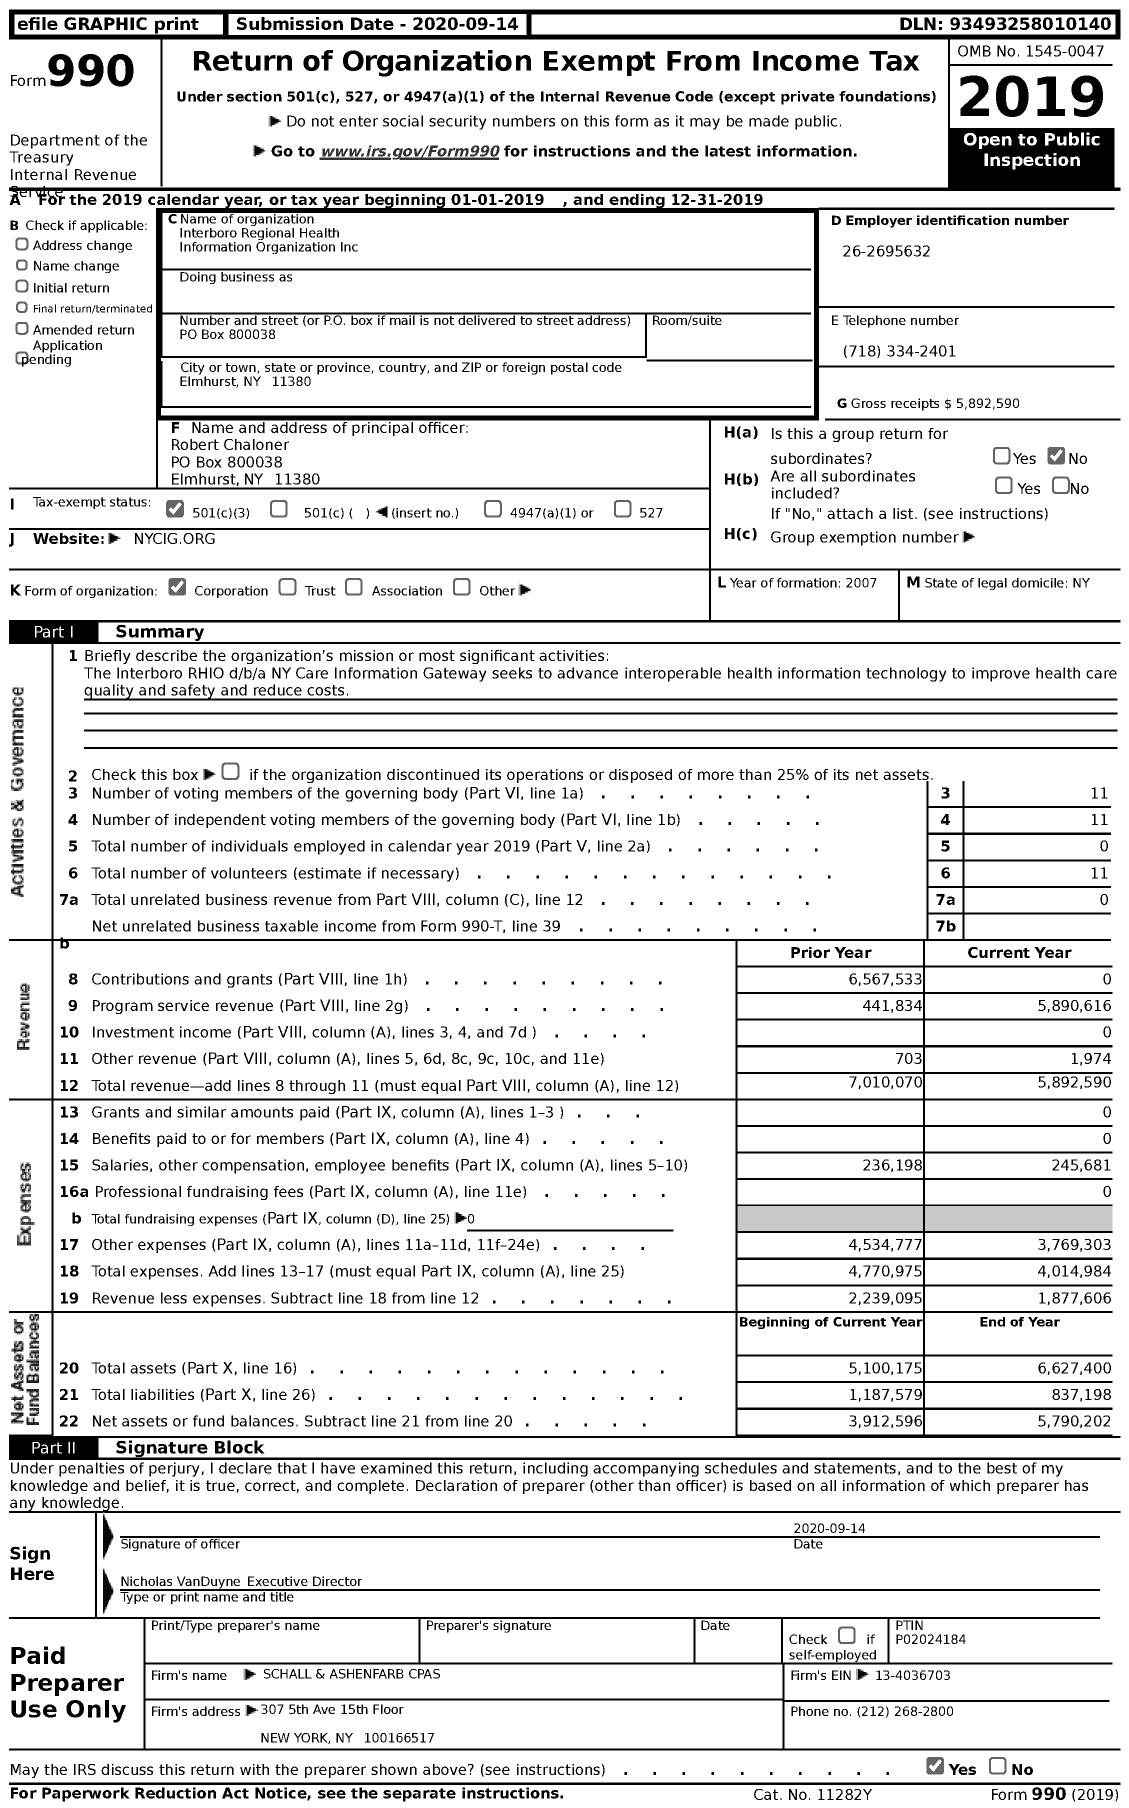 Image of first page of 2019 Form 990 for Interboro Regional Health Information Organization